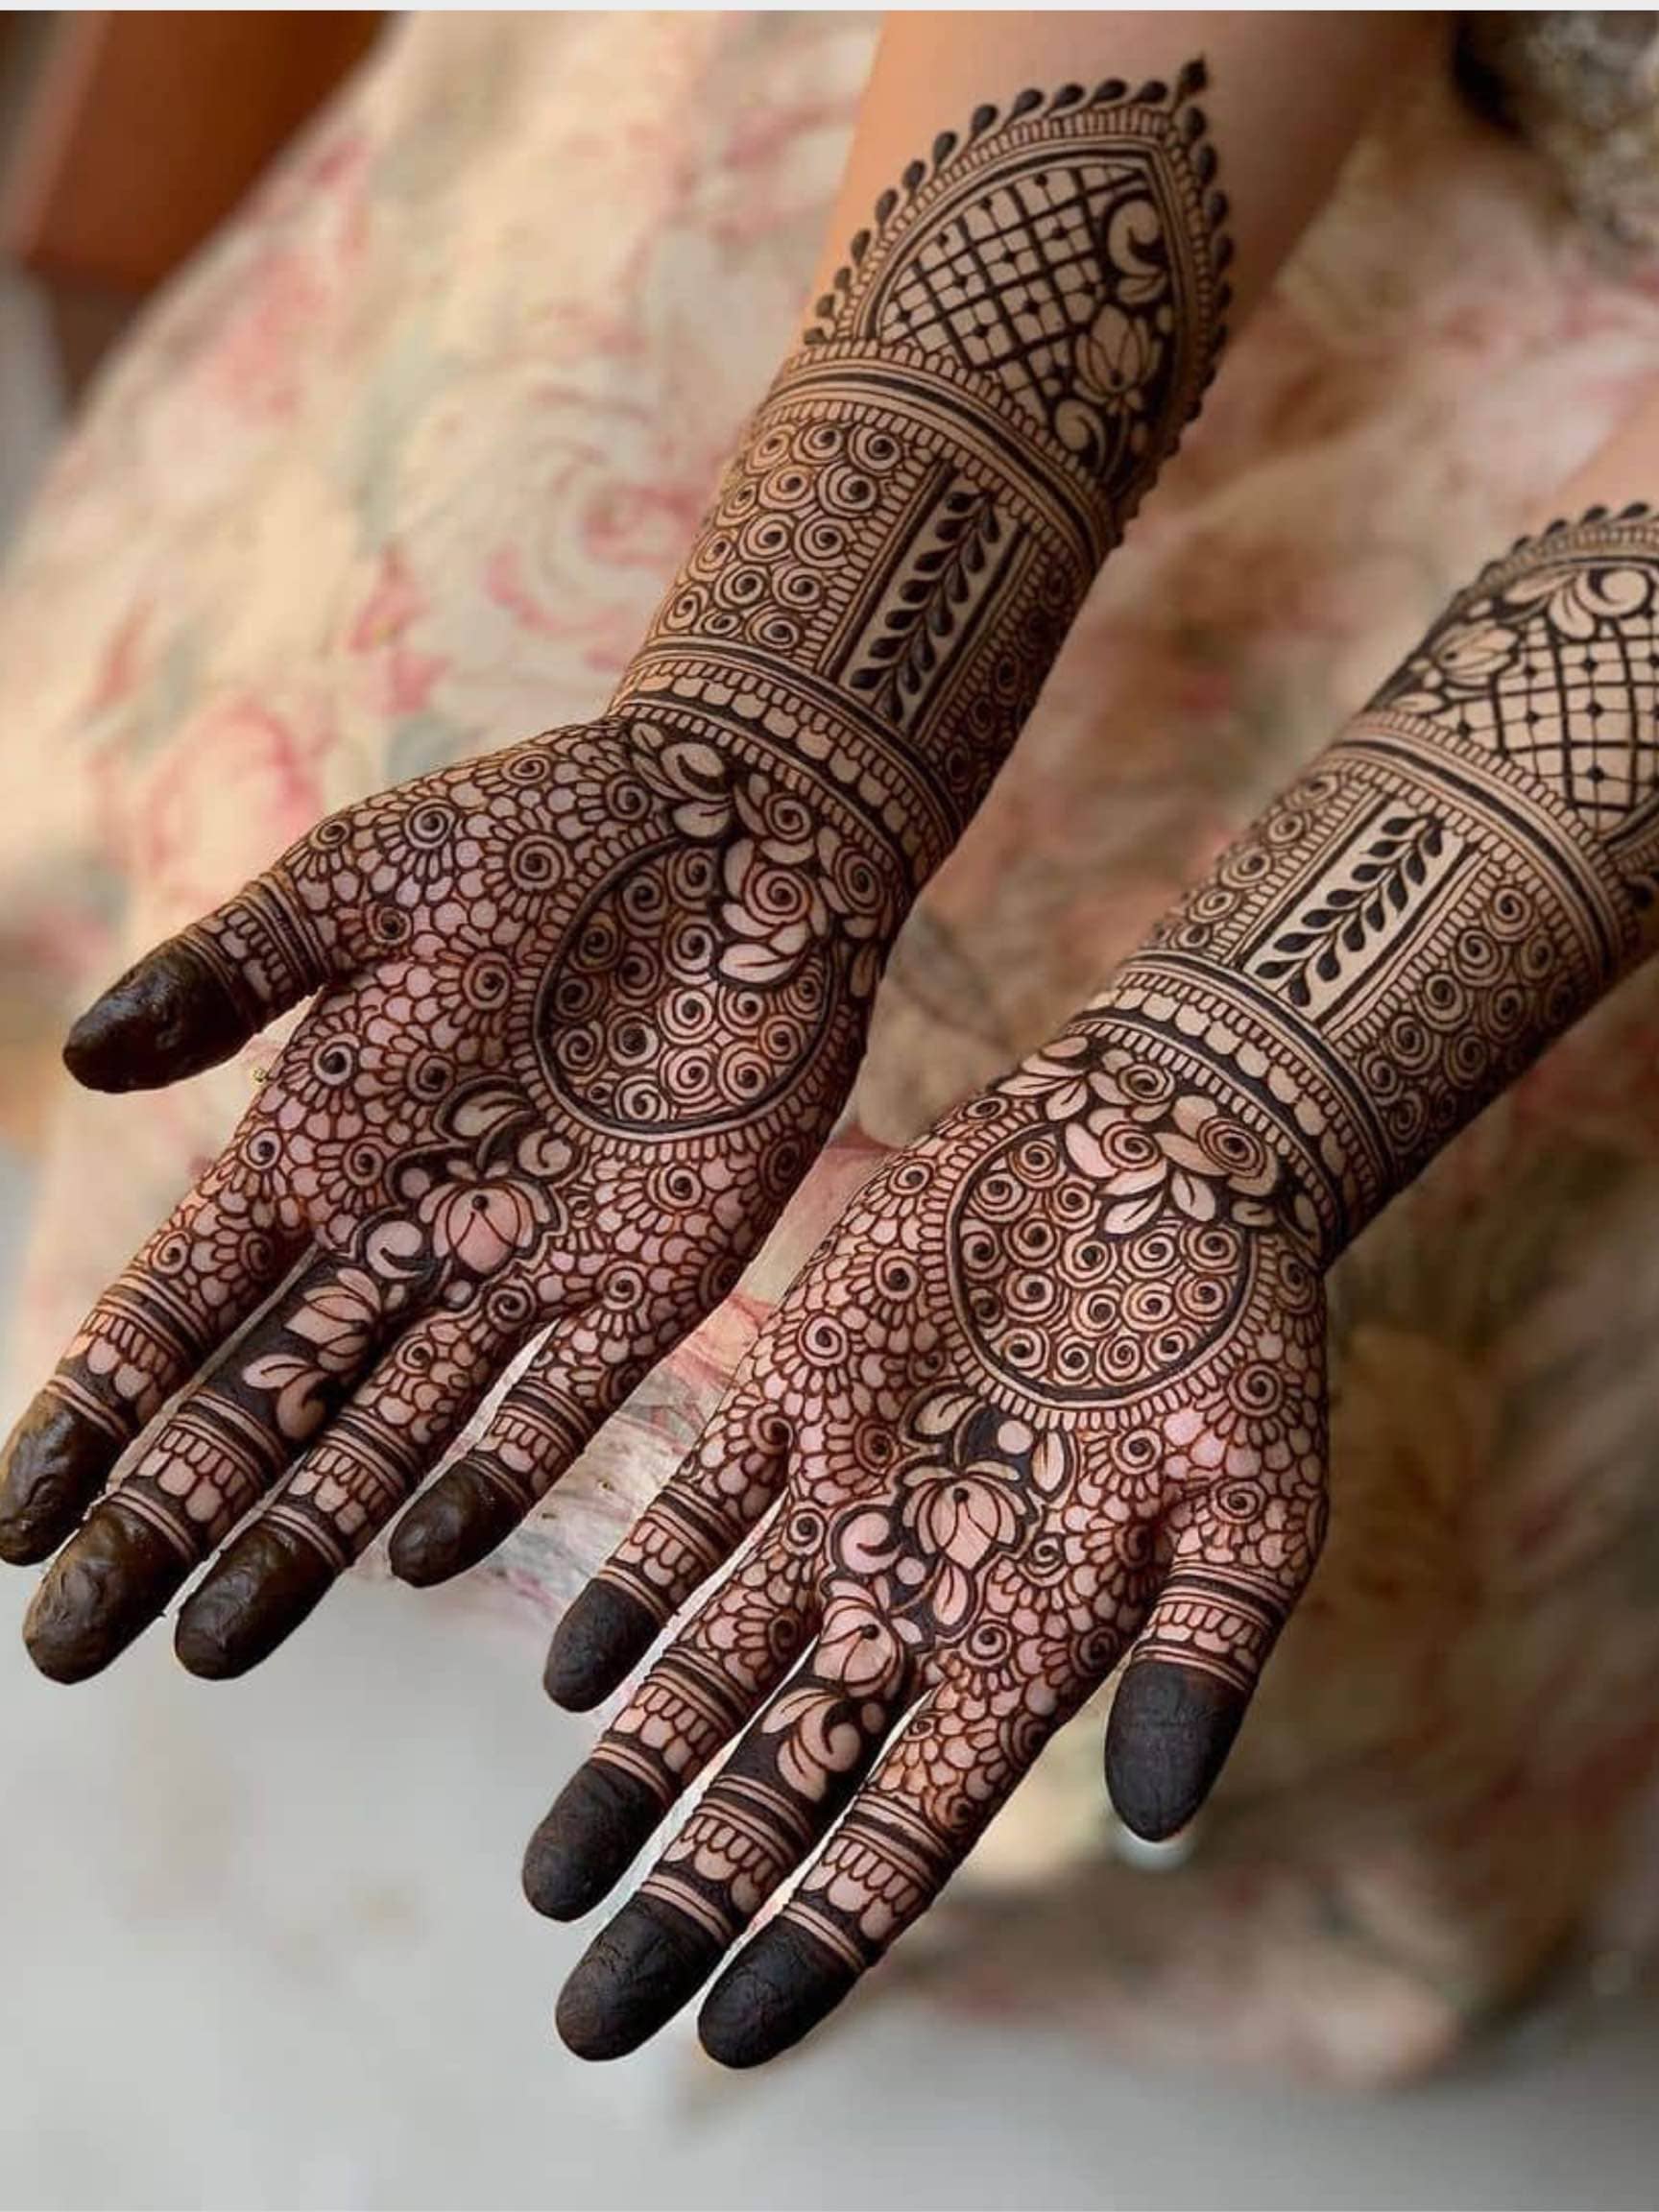 Trending Bridal Mehndi Designs You Need to Check Out NOW - Wish N Wed